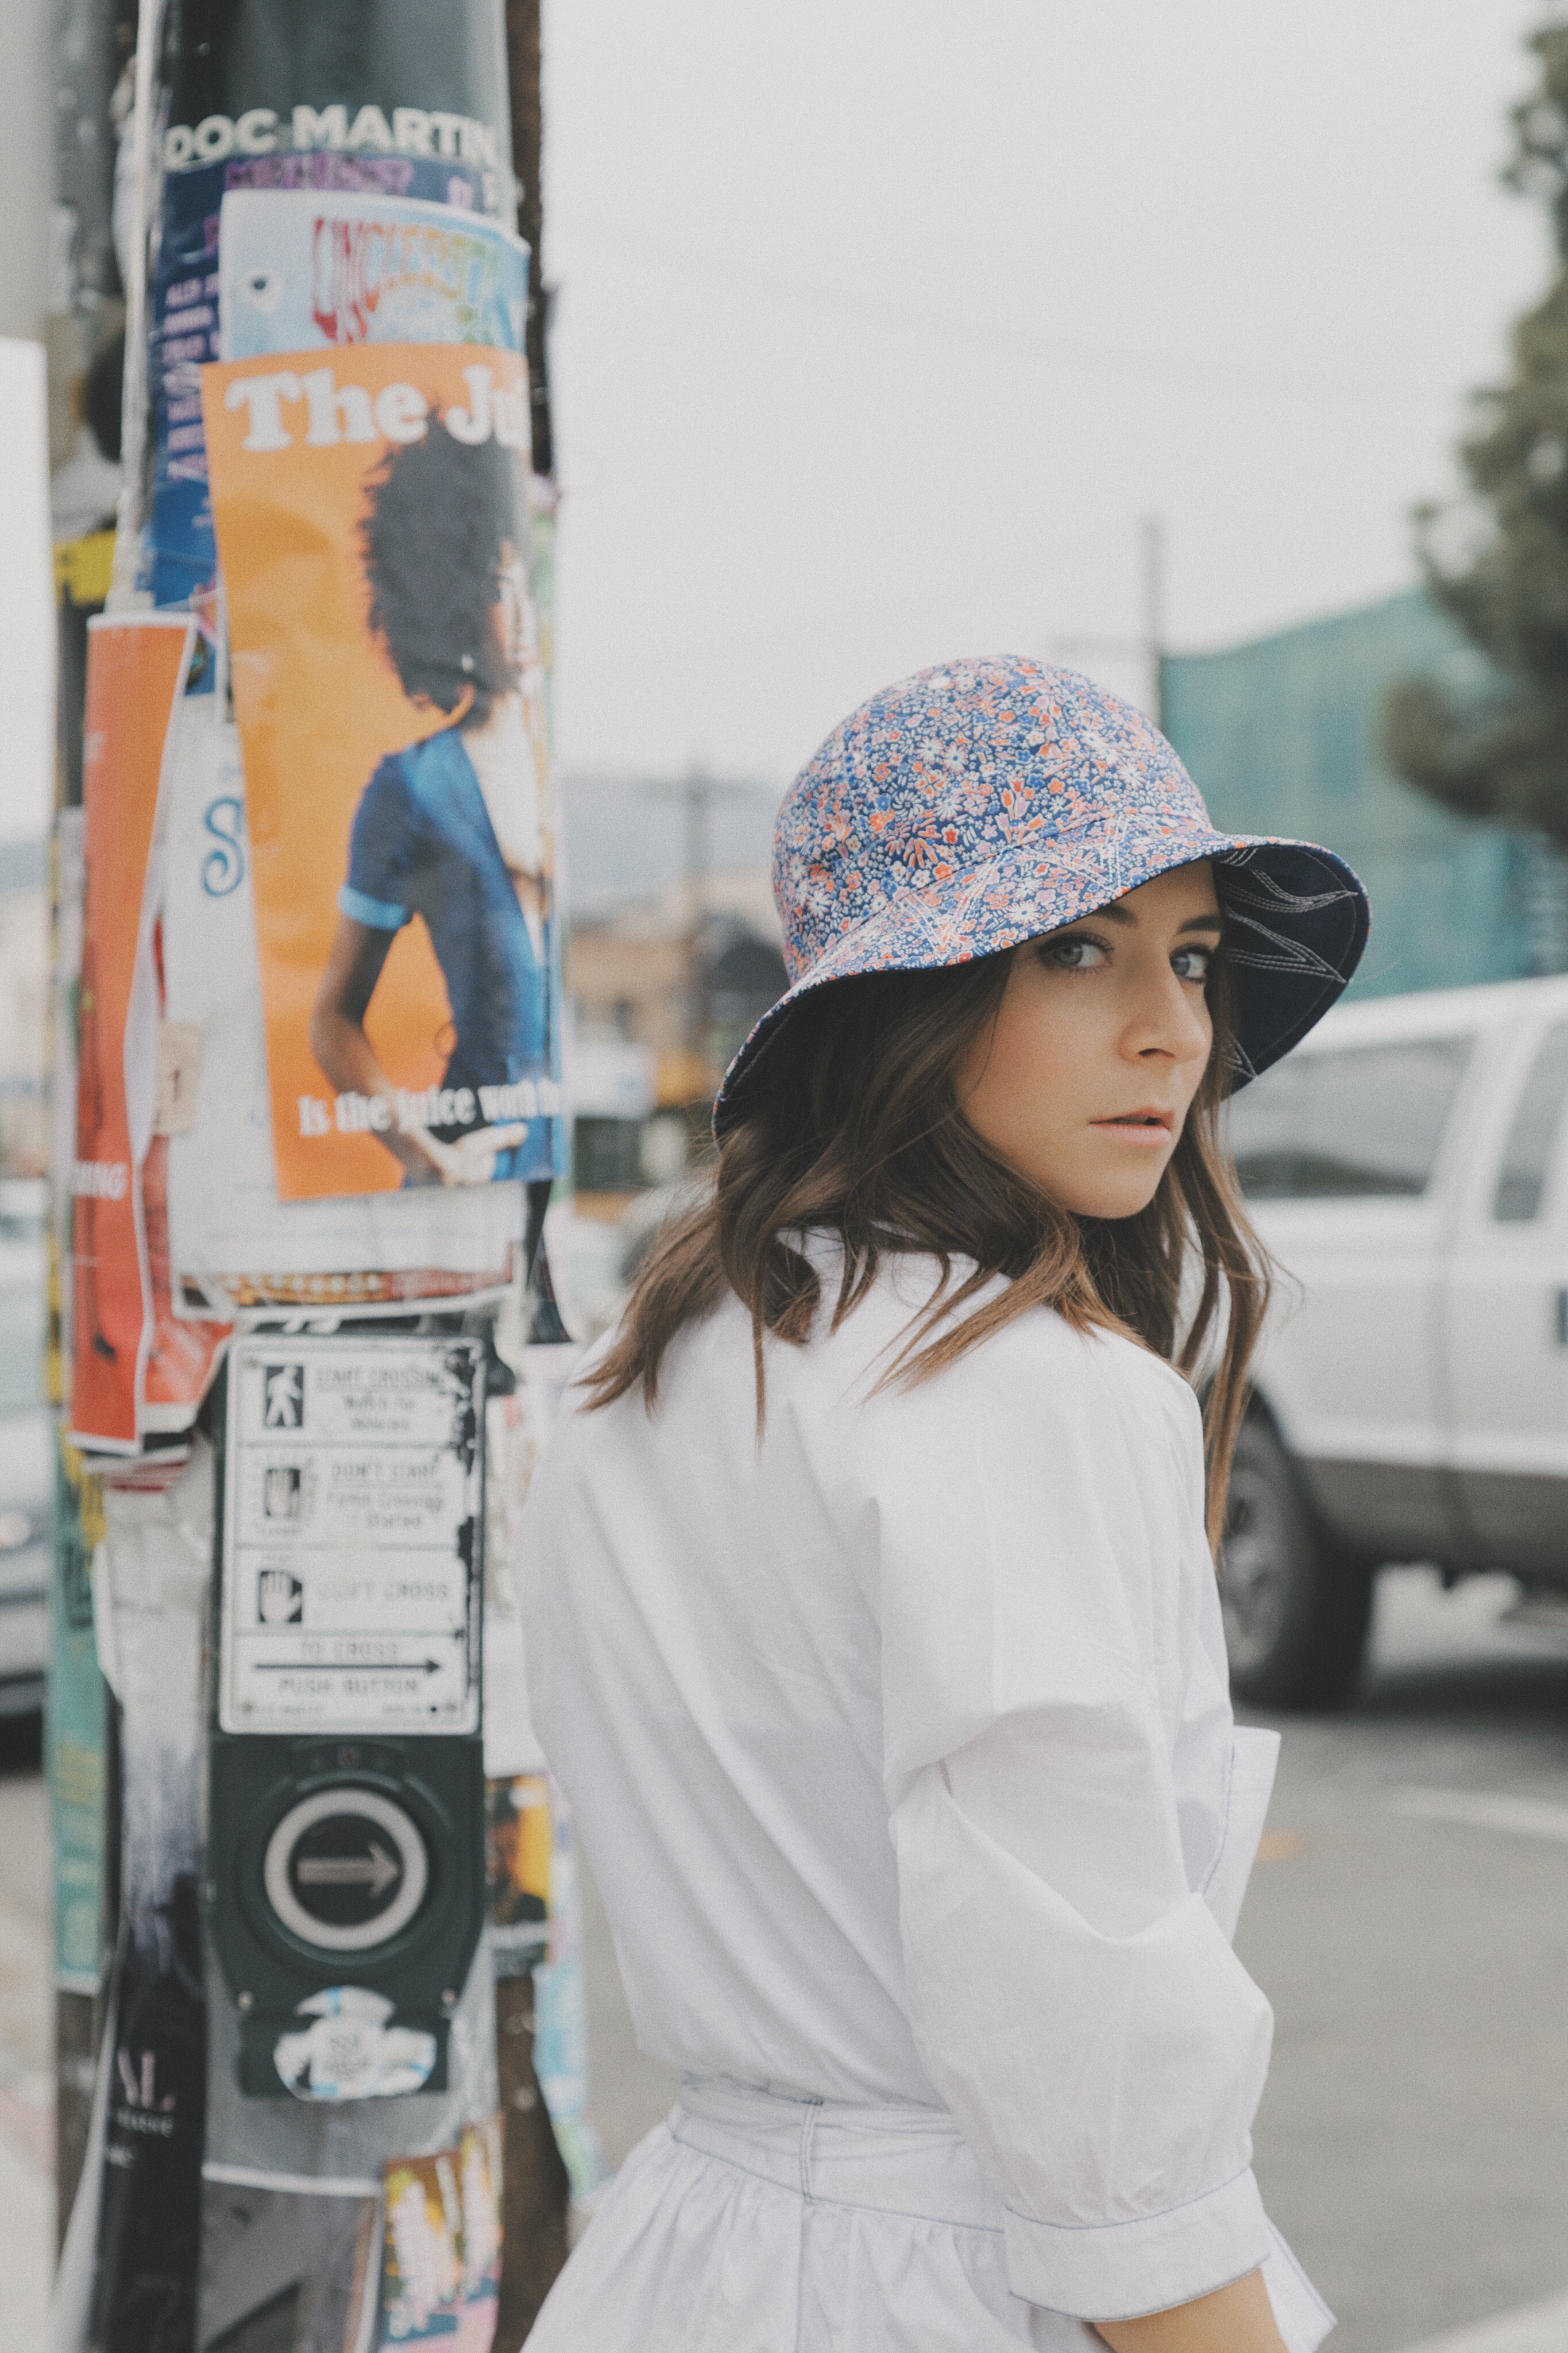 Summer hats 2019: Visor hat, bucket hat, ribbon straw hat, raw edge straw bar. Your summer essentials edited by Julia Comil French fashion blogger in Los Angeles